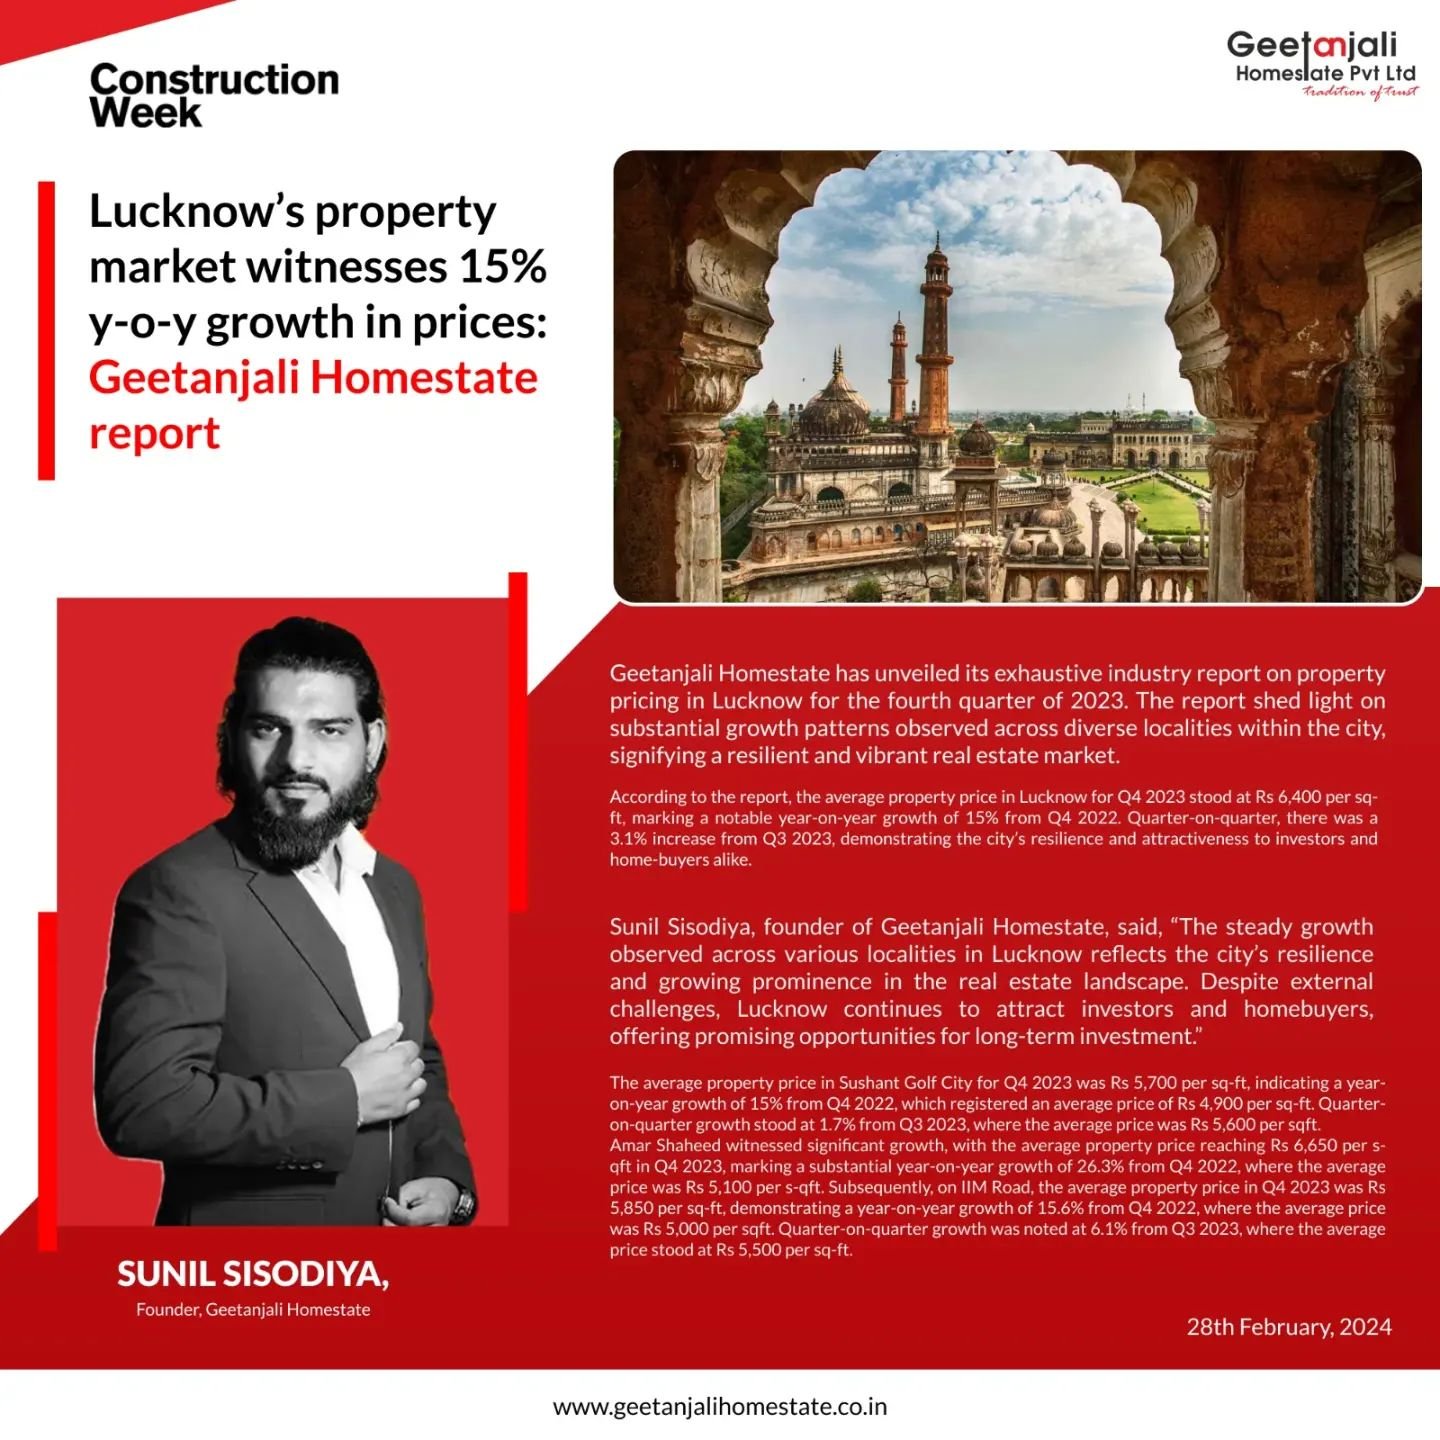 Lucknow’s property market witnesses 15% y-o-y growth in prices: Geetanjali Homestate report